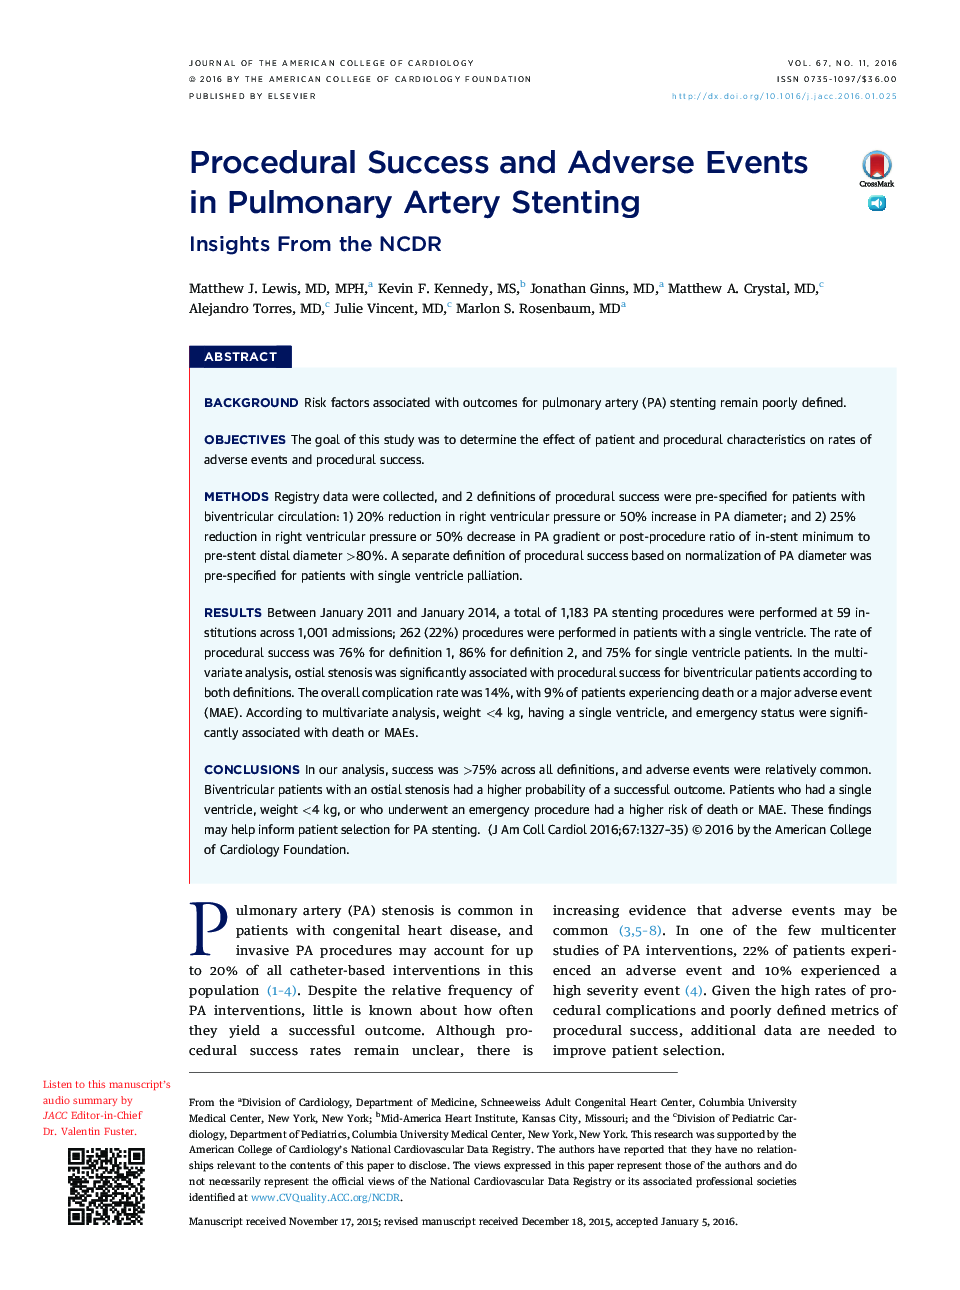 Procedural Success and Adverse Events inÂ Pulmonary Artery Stenting: Insights From the NCDR